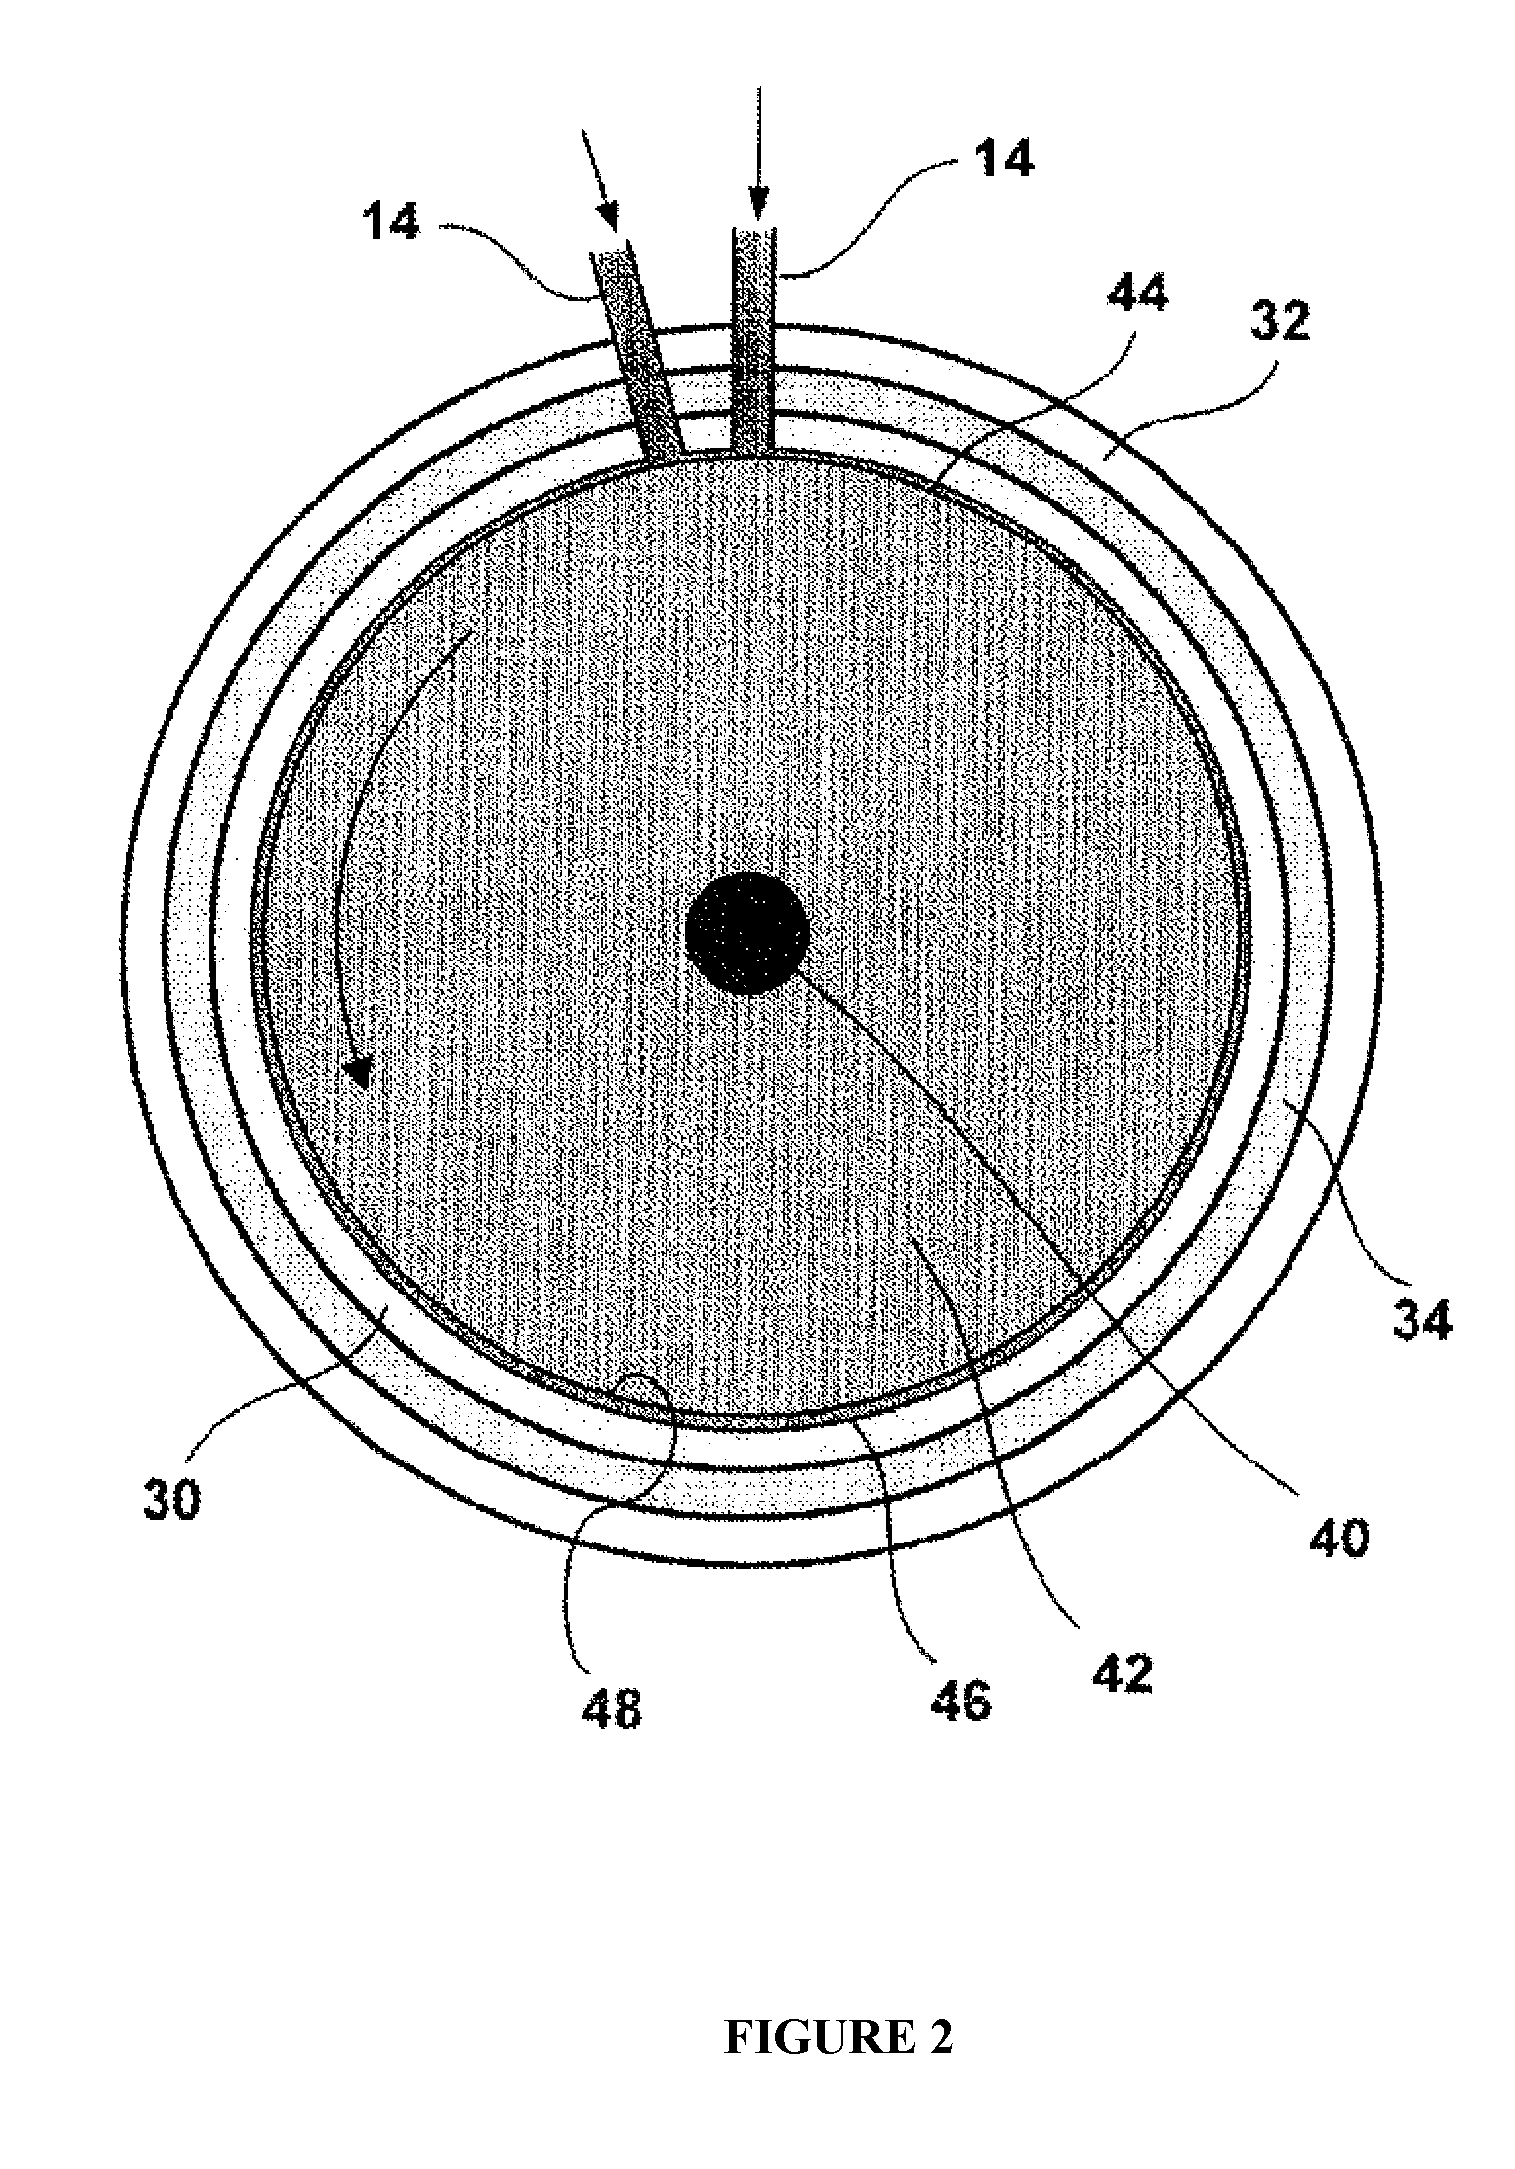 Esterification and transesterification systems, methods and apparatus